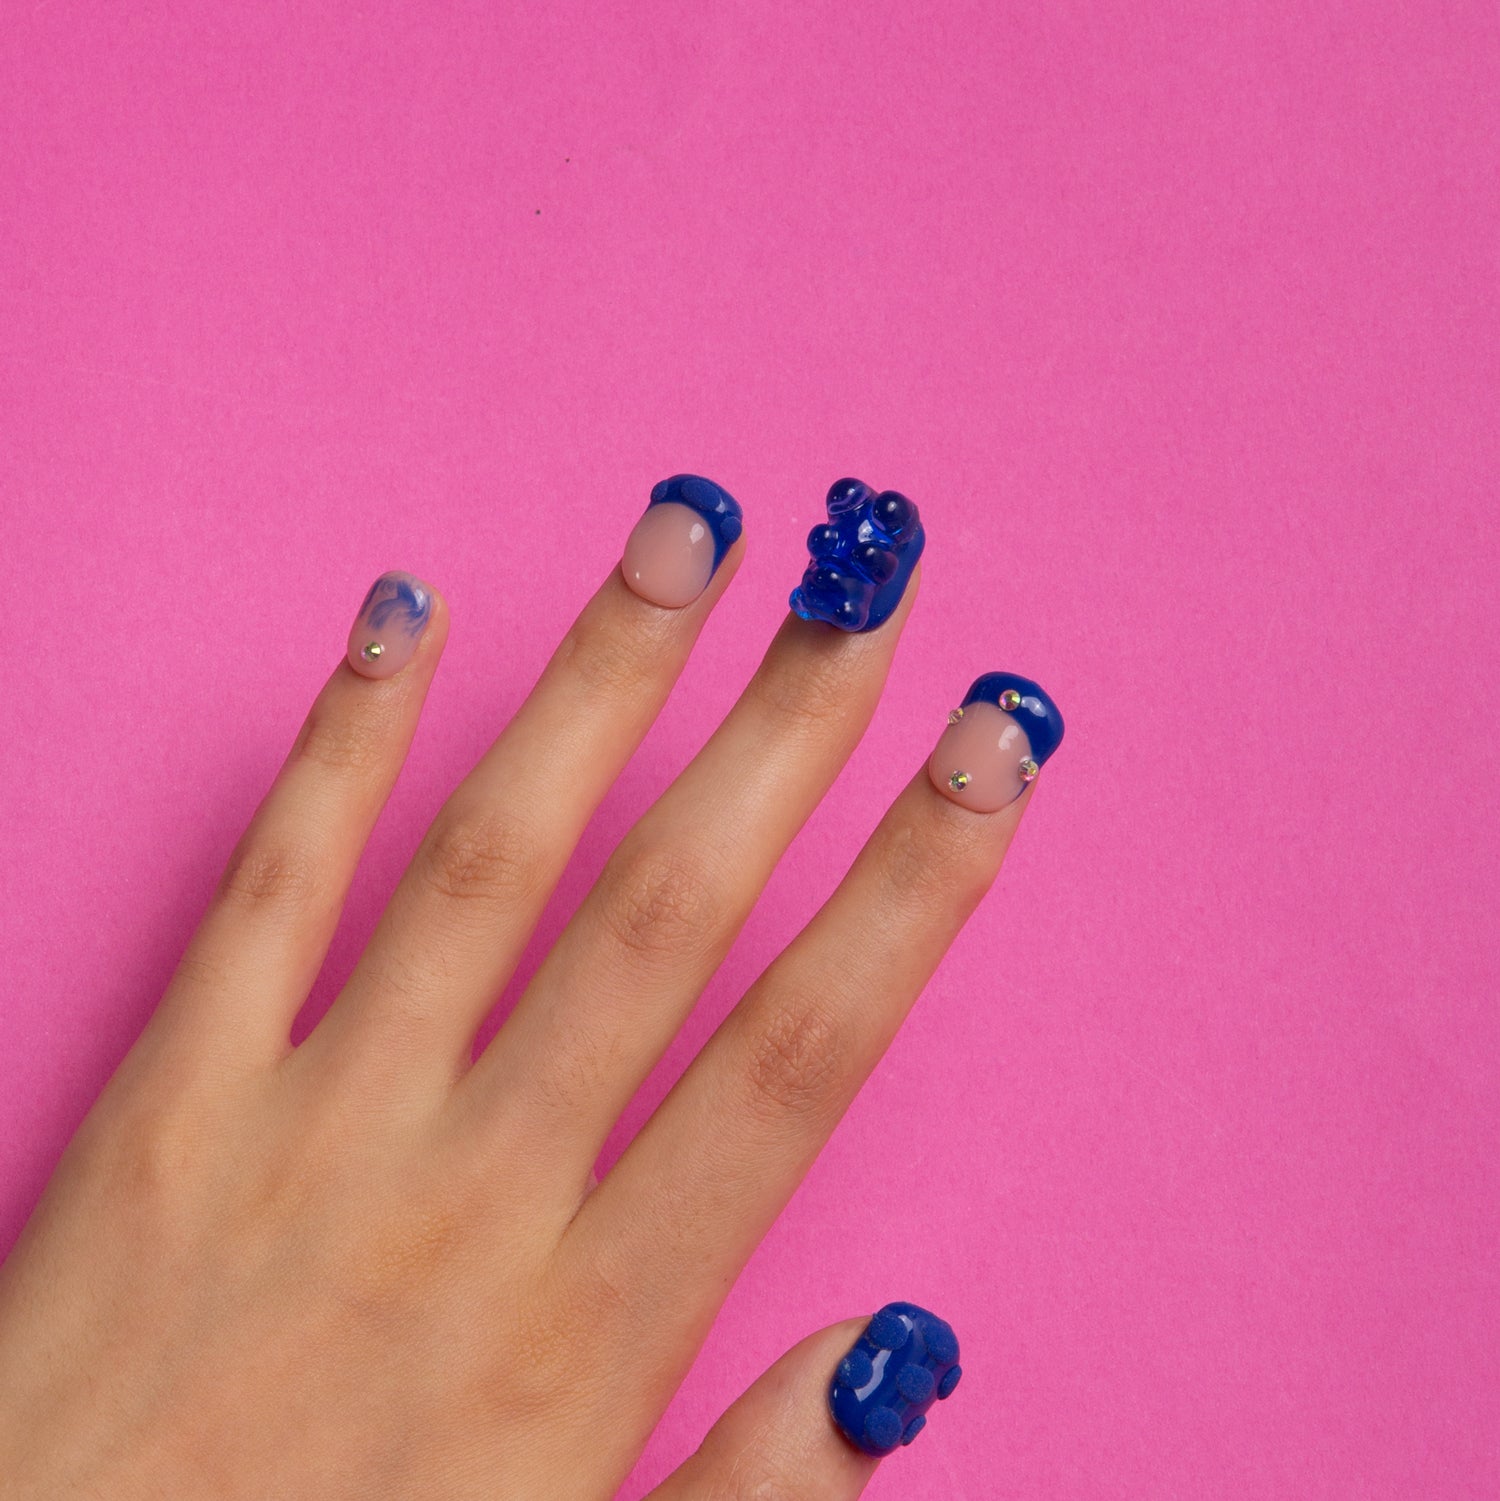 Hand sporting 'Little Blue Bear' square-shaped press-on French tip nails with blue hue, rhinestones and 3D gummy bears on a pink background.